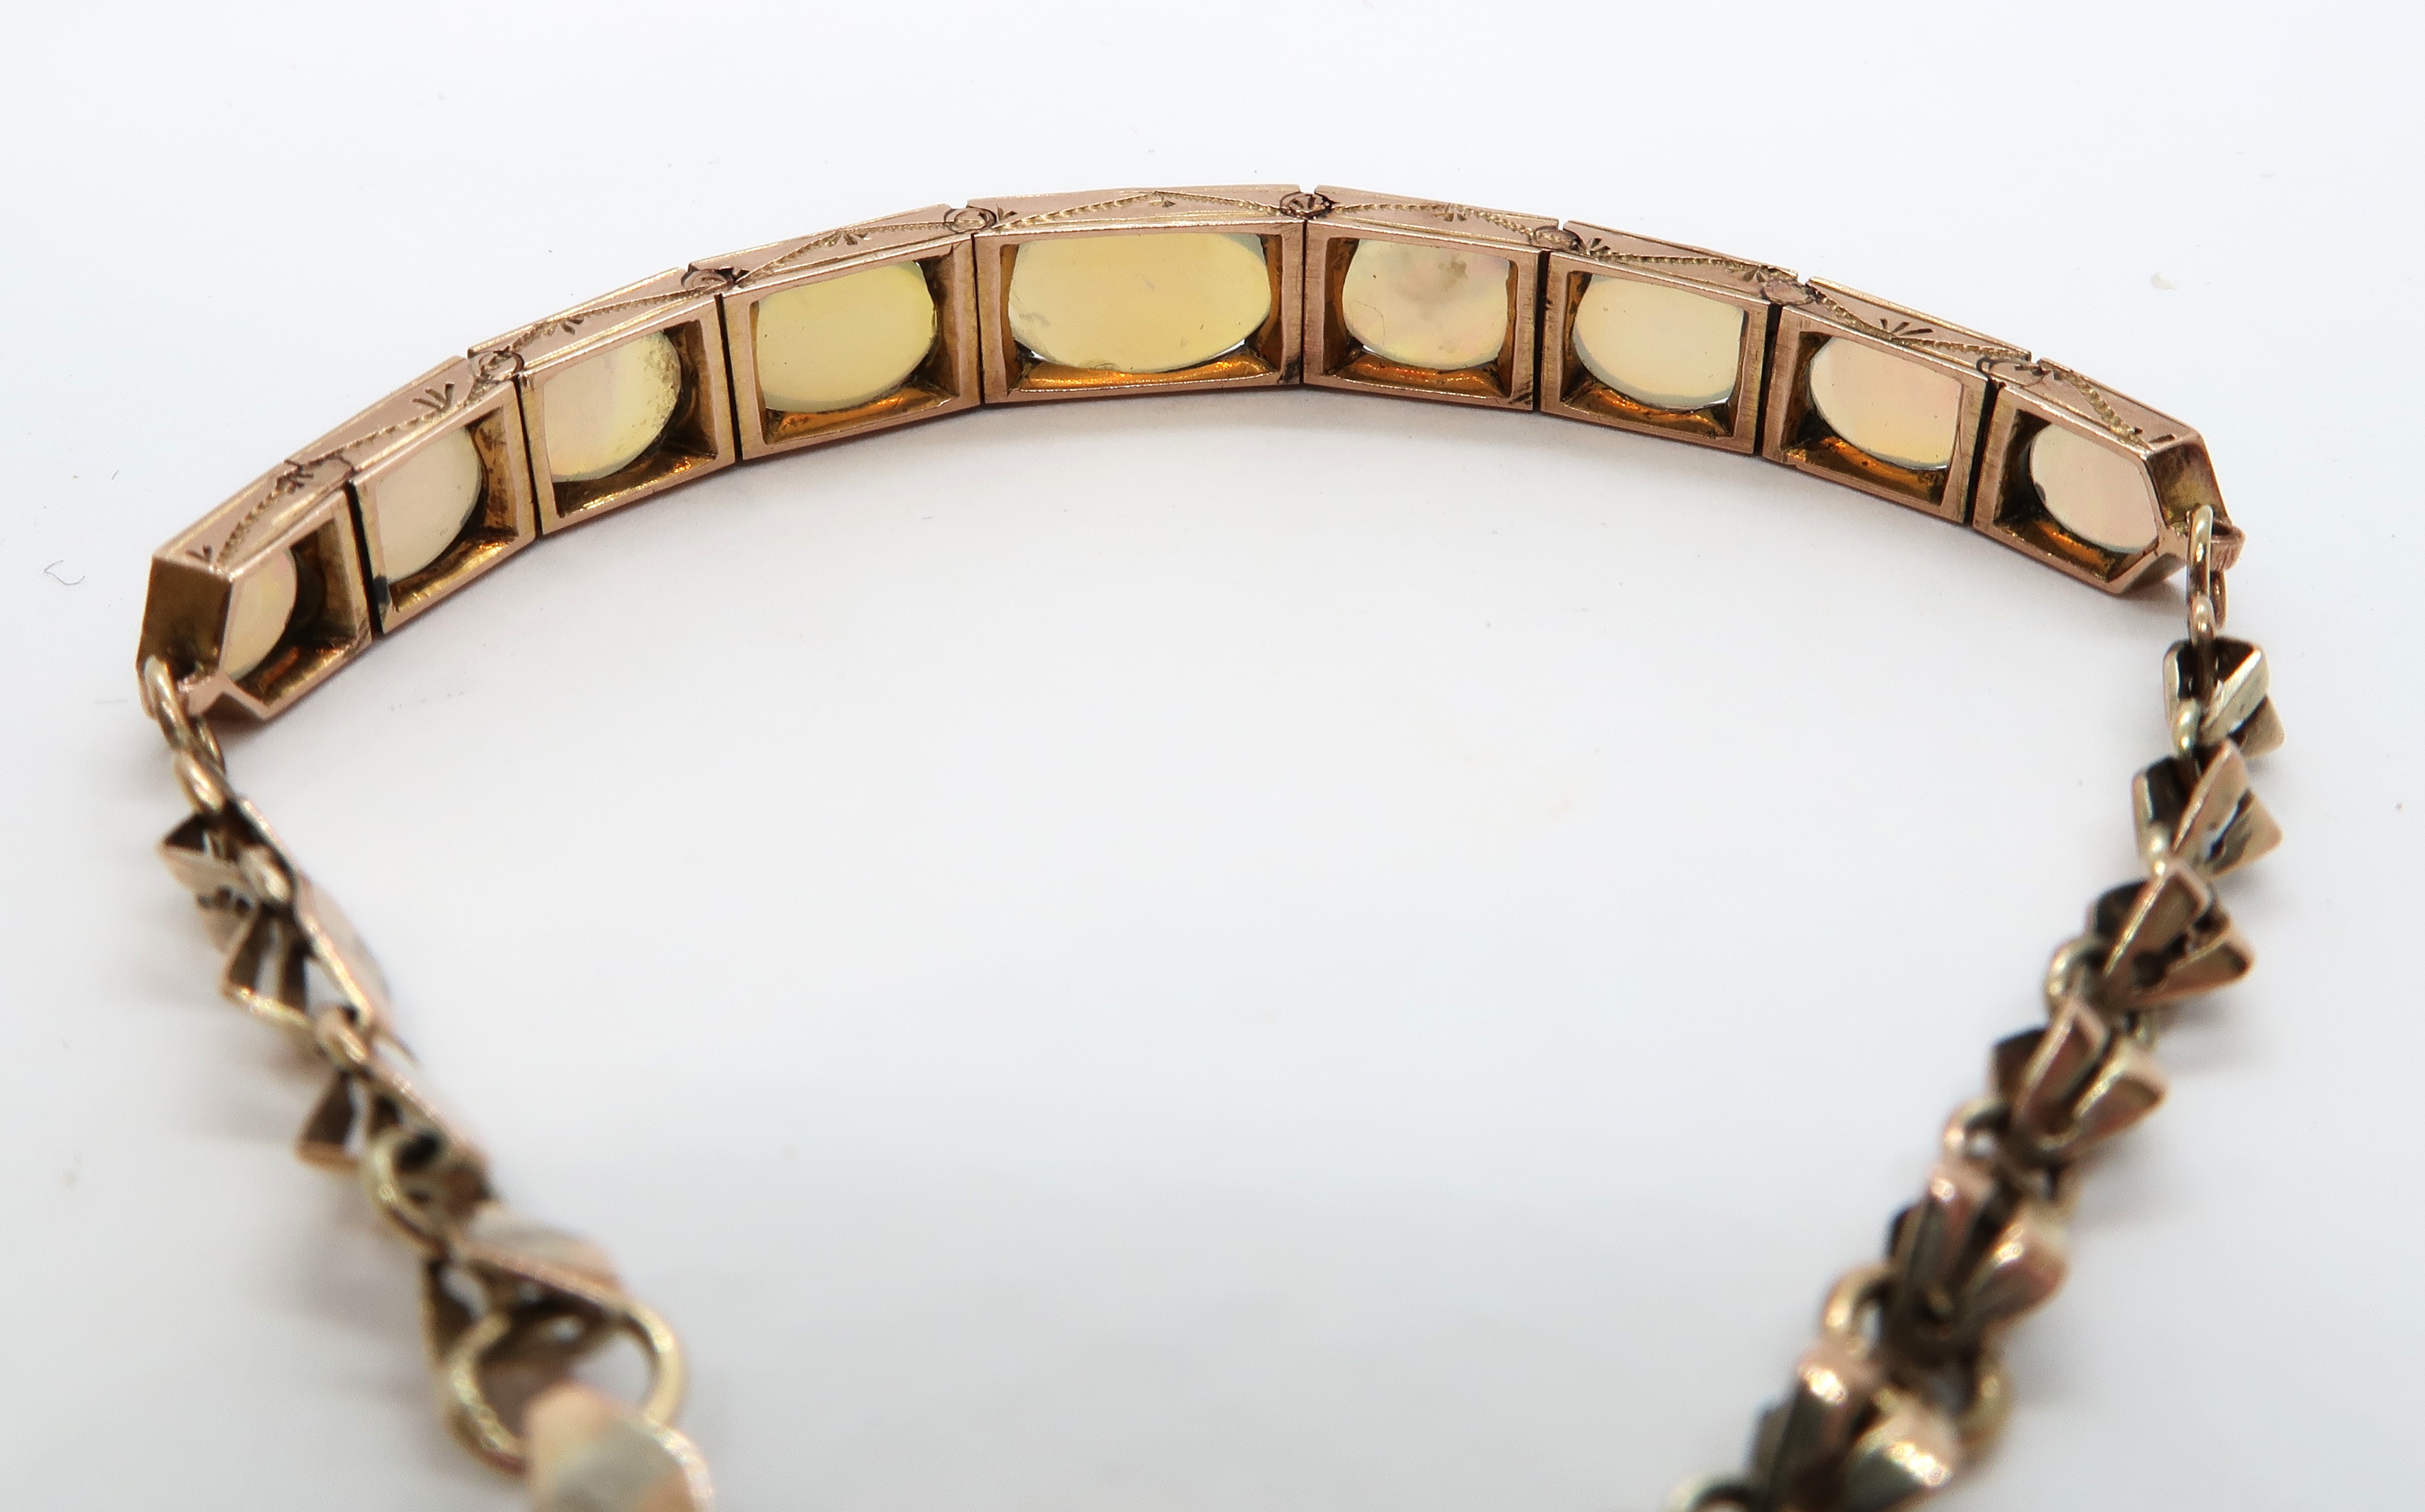 A 9ct yellow gold and opal articulated bracelet with nine graduated opals - 7.1 grams - Image 4 of 4